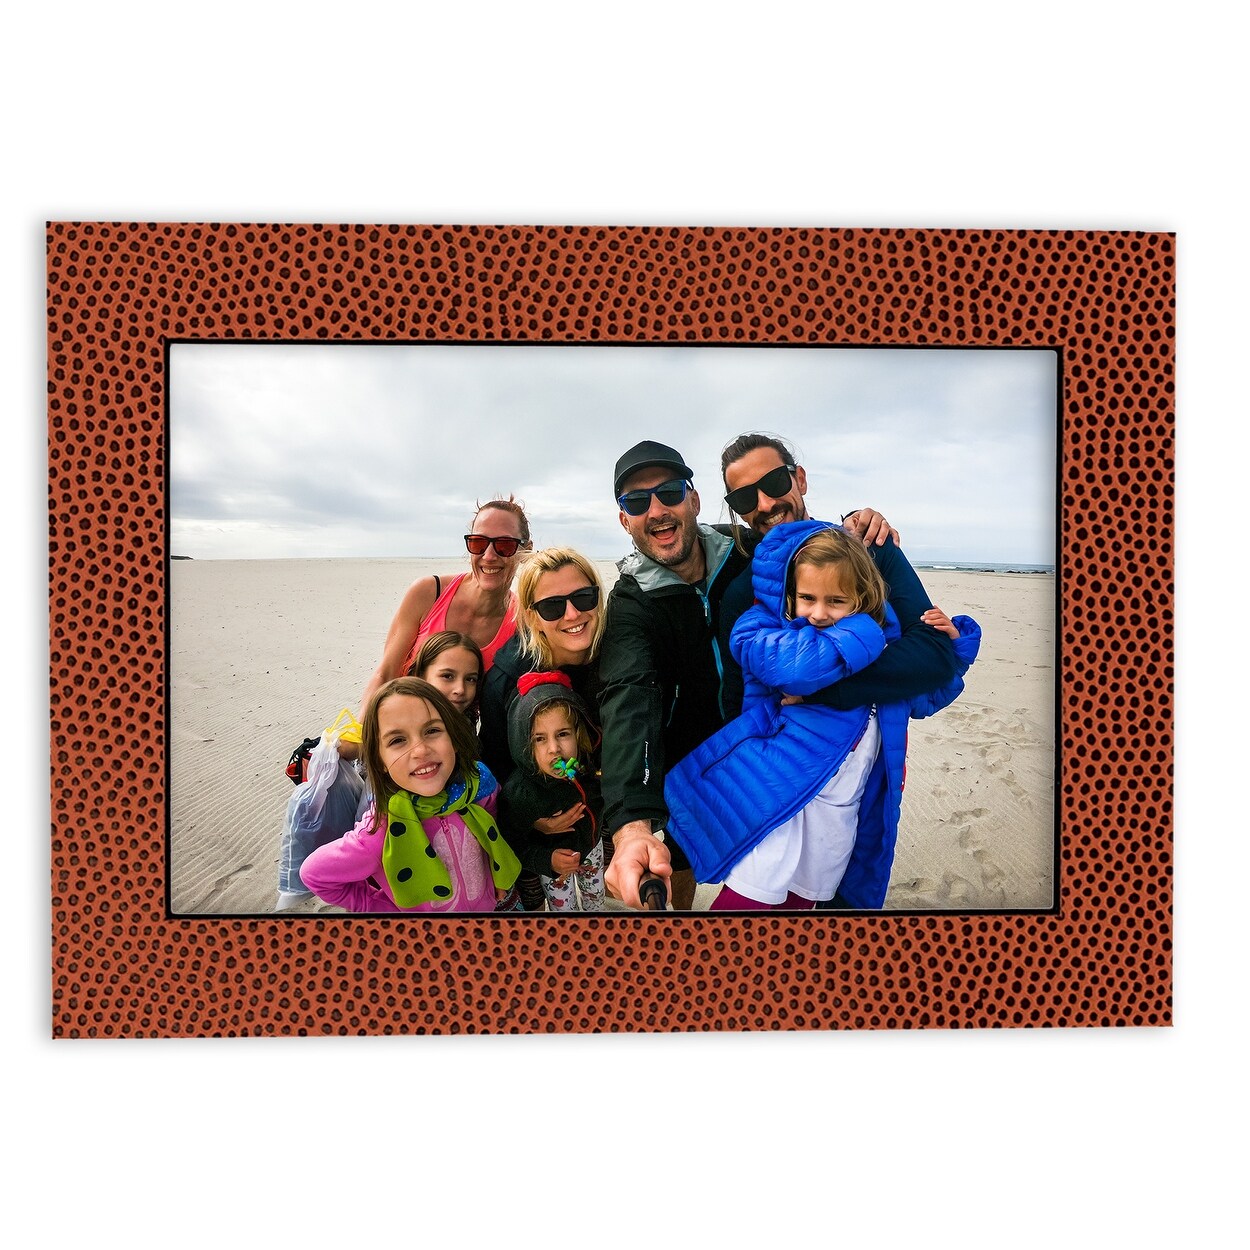 18x24 Mat for 13x19 Photo - Precut Textured White Picture Matboard for  Frames Measuring 18 x 24 Inches - Bevel Cut Matte to Display Art Measuring  13 x